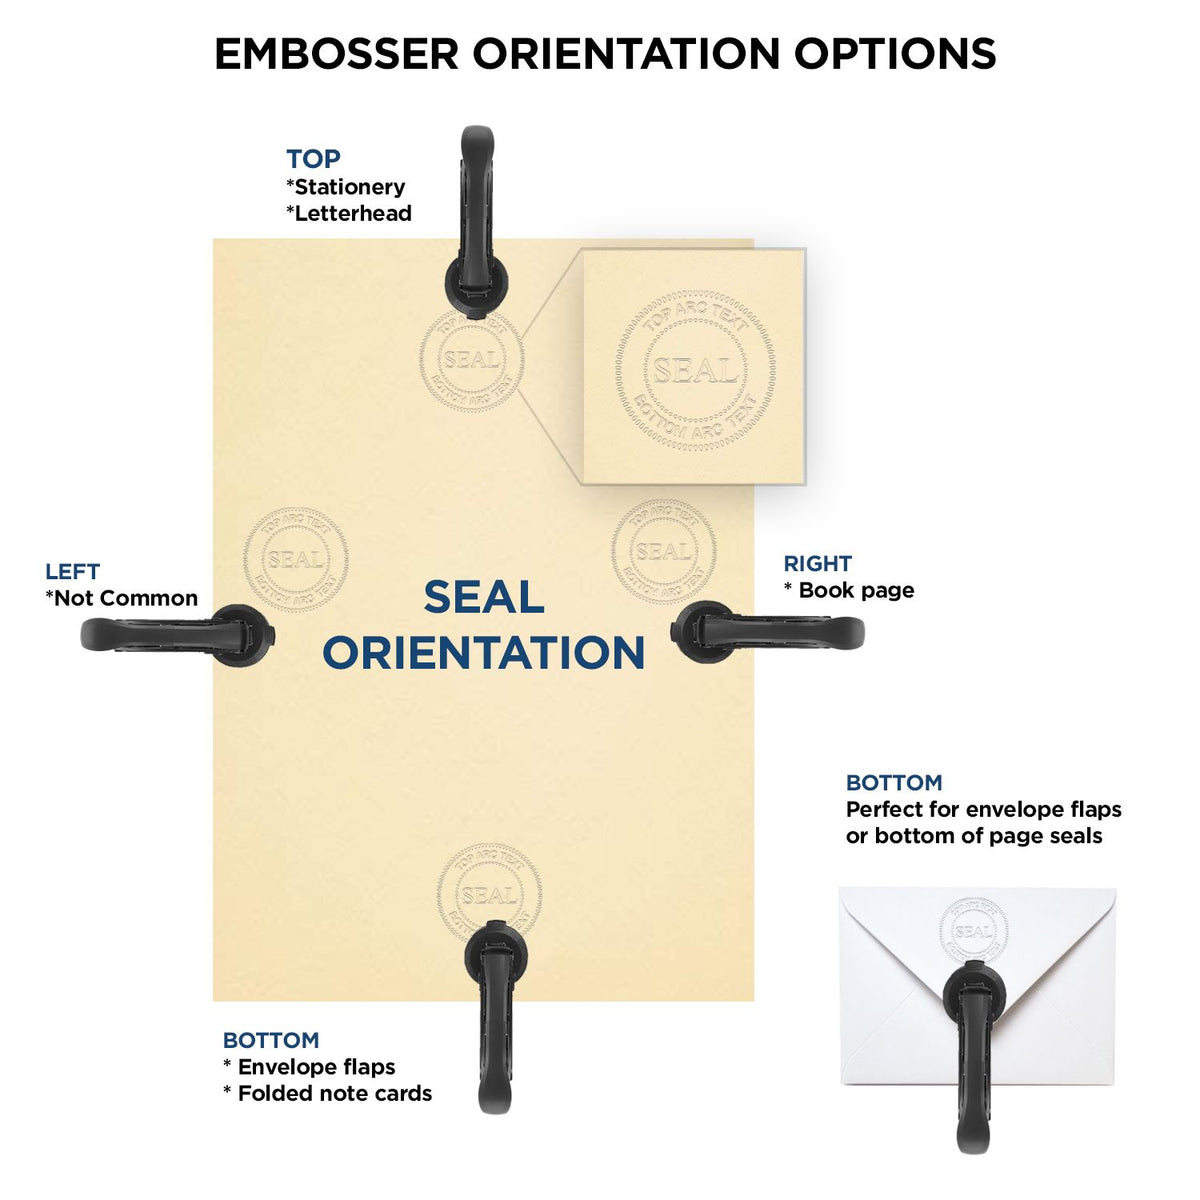 An infographic for the State of North Dakota Soft Land Surveyor Embossing Seal showing embosser orientation, this is showing examples of a top, bottom, right and left insert.